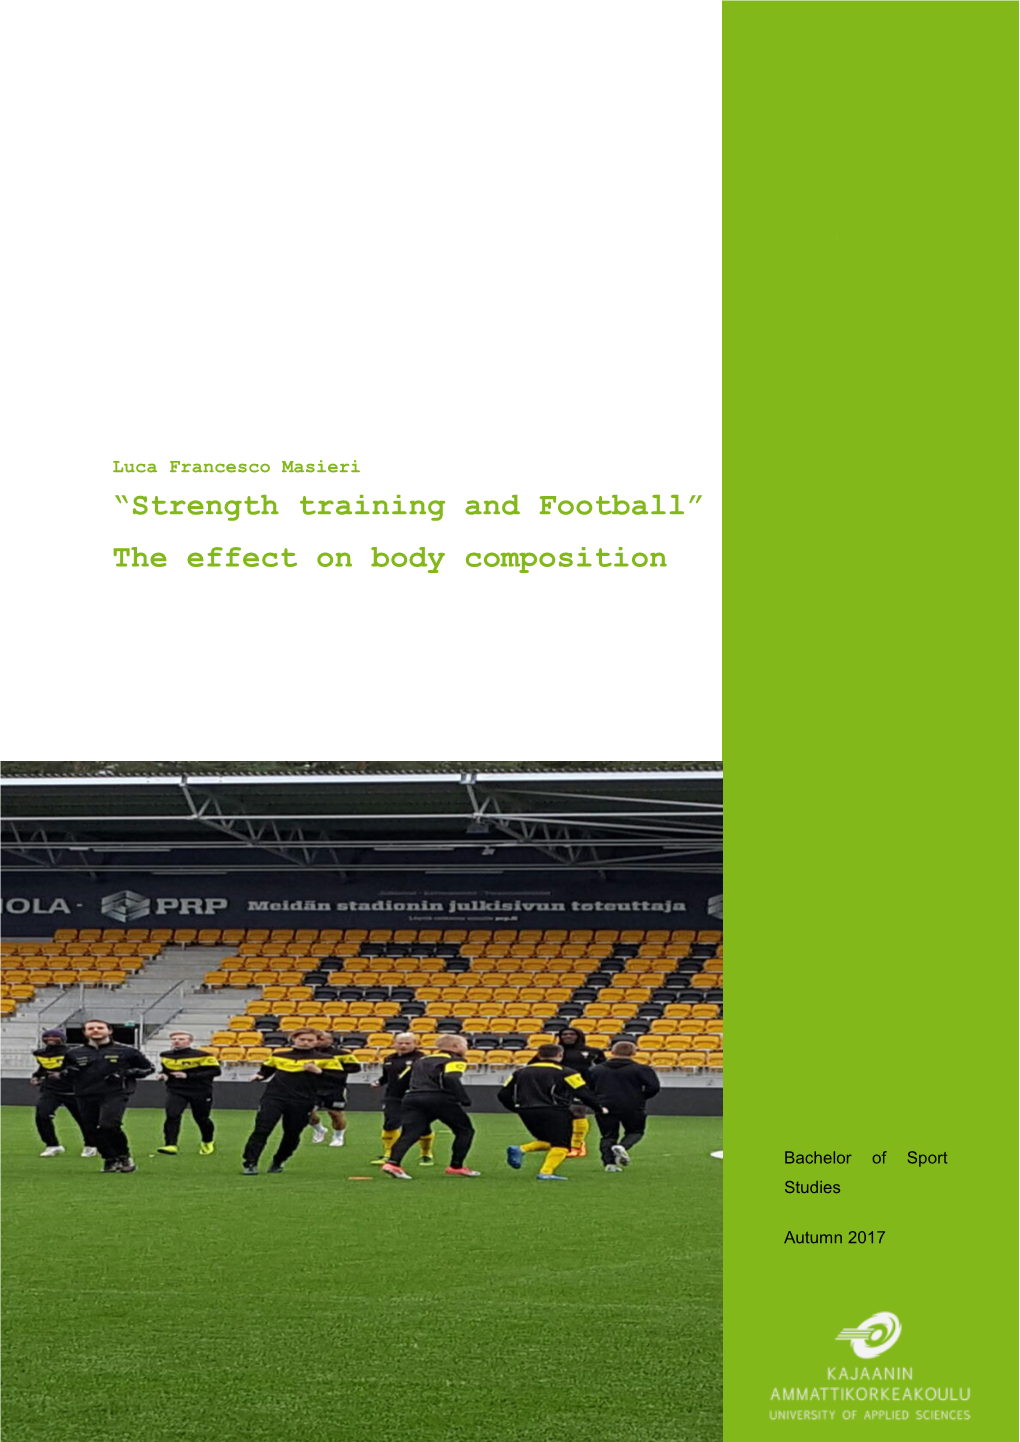 Strength Training and Football” the Effect on Body Composition